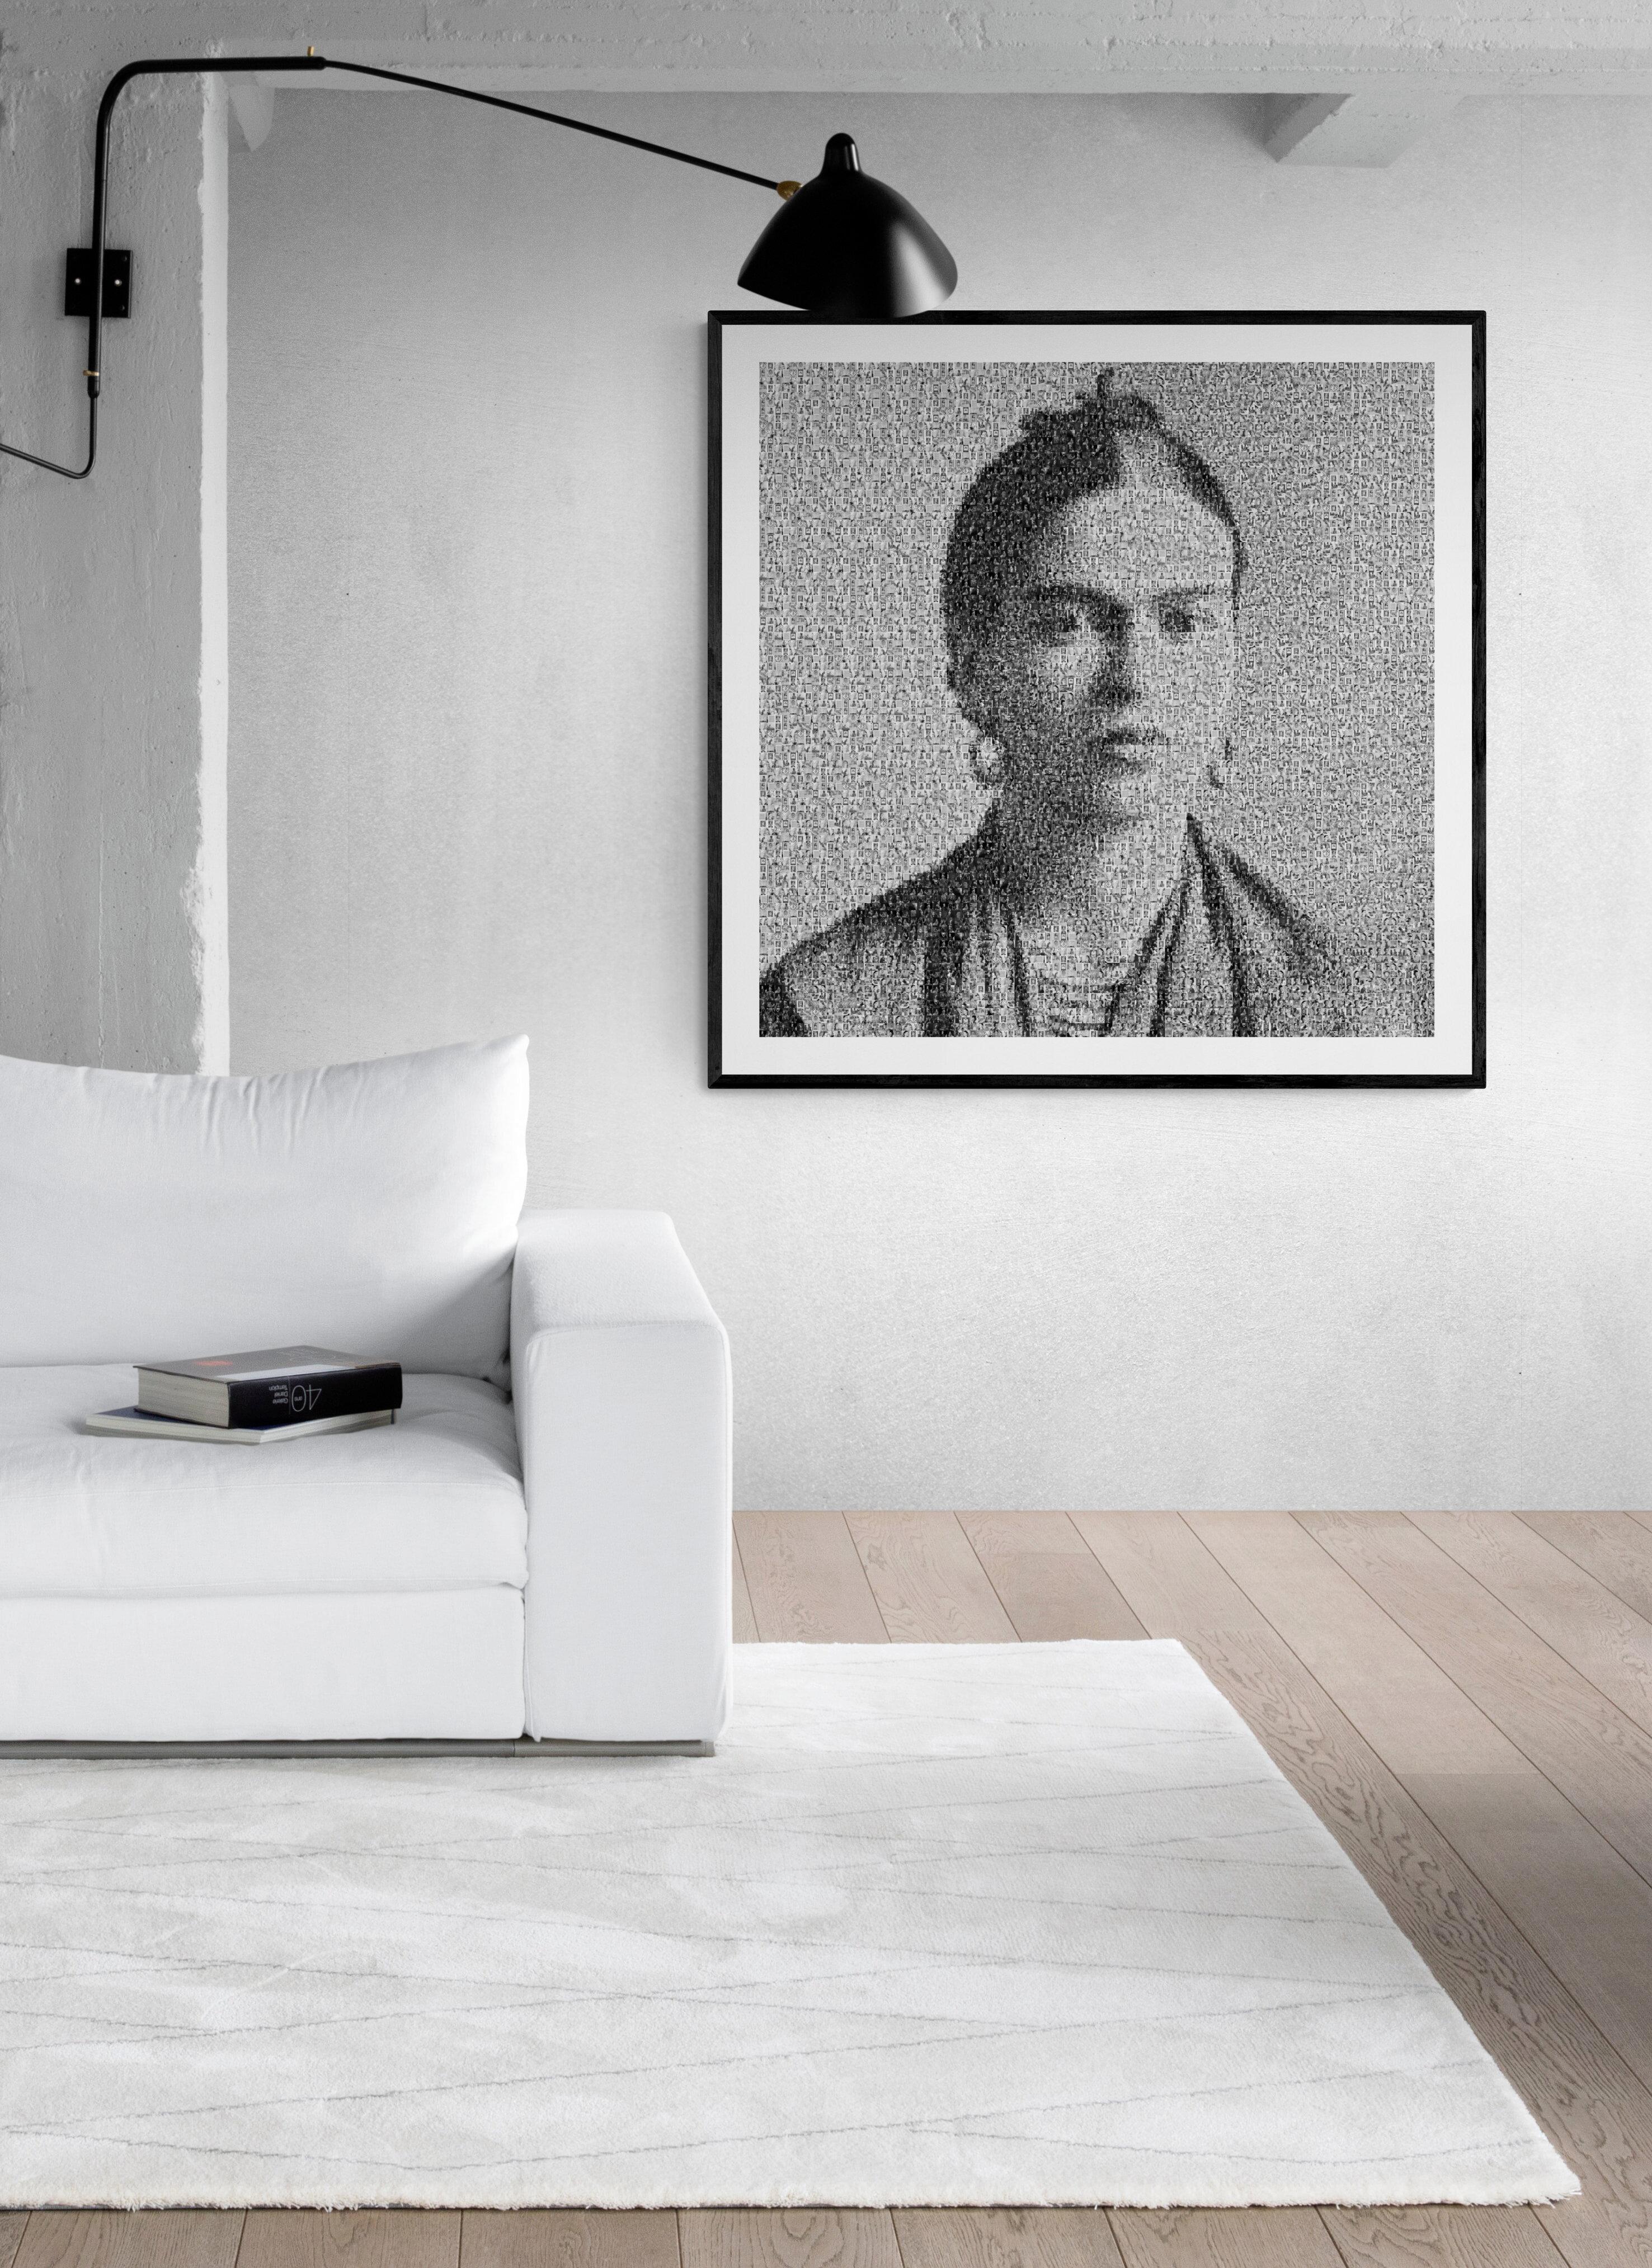 
Frida i is a photomosaic artwork by Destro. The first release in a series mosaic works called 